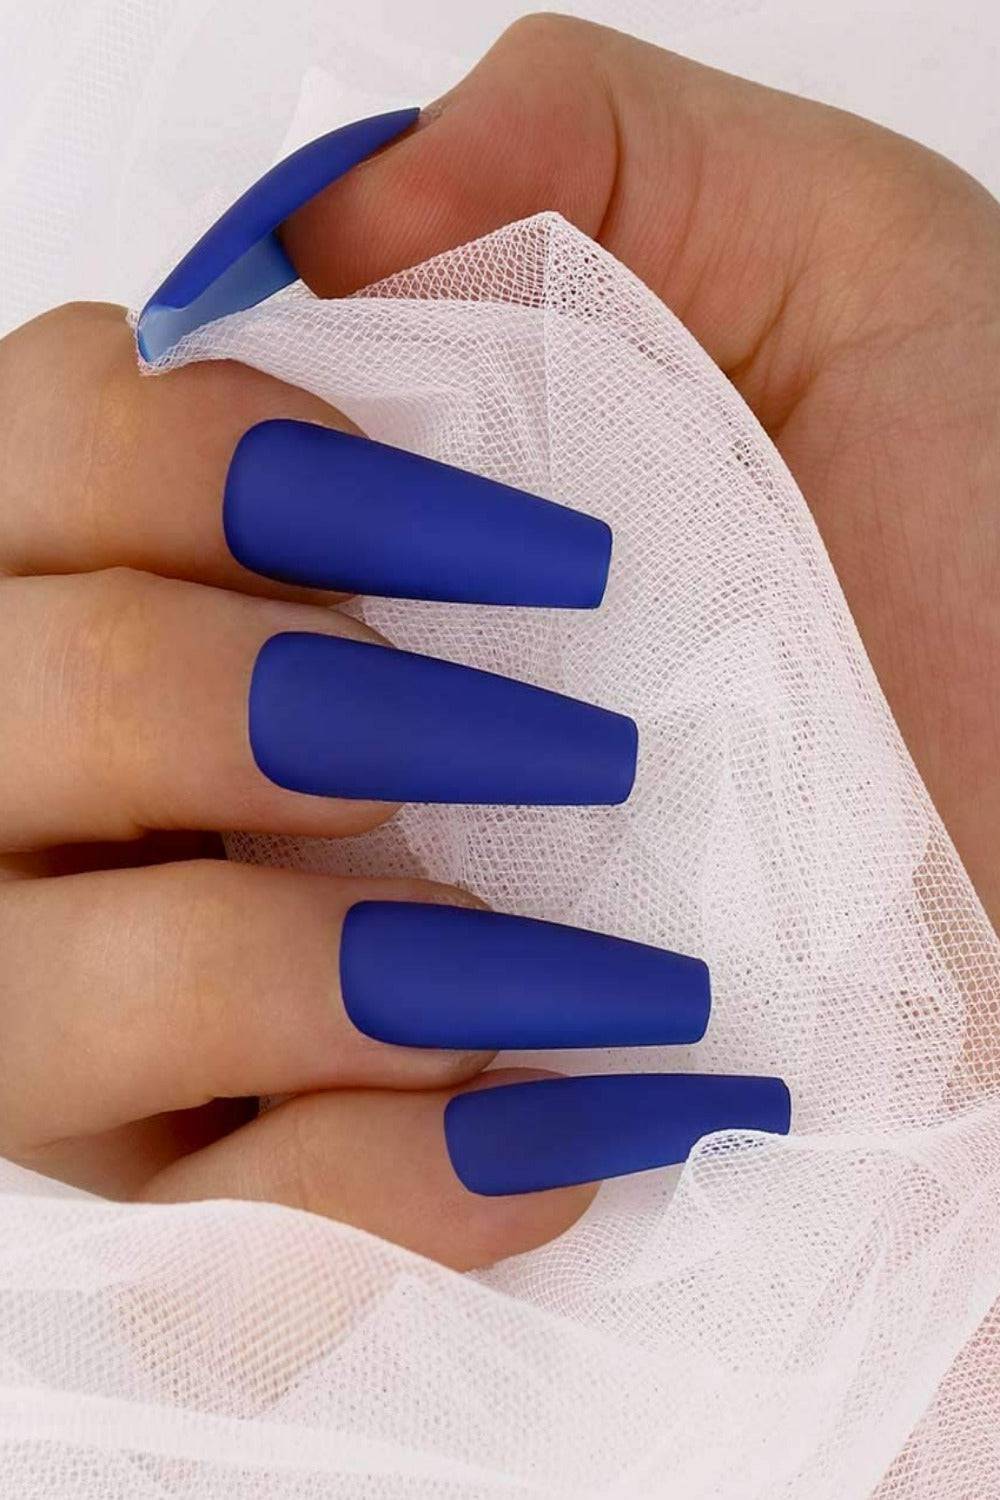 Womens Manicure On Long Round Nails Gel Nail Polish Matte Blue Colour With A  Camouflage Design Of The Eye In The Triangle Matte Finish Blue With A  Design Of The Planet And